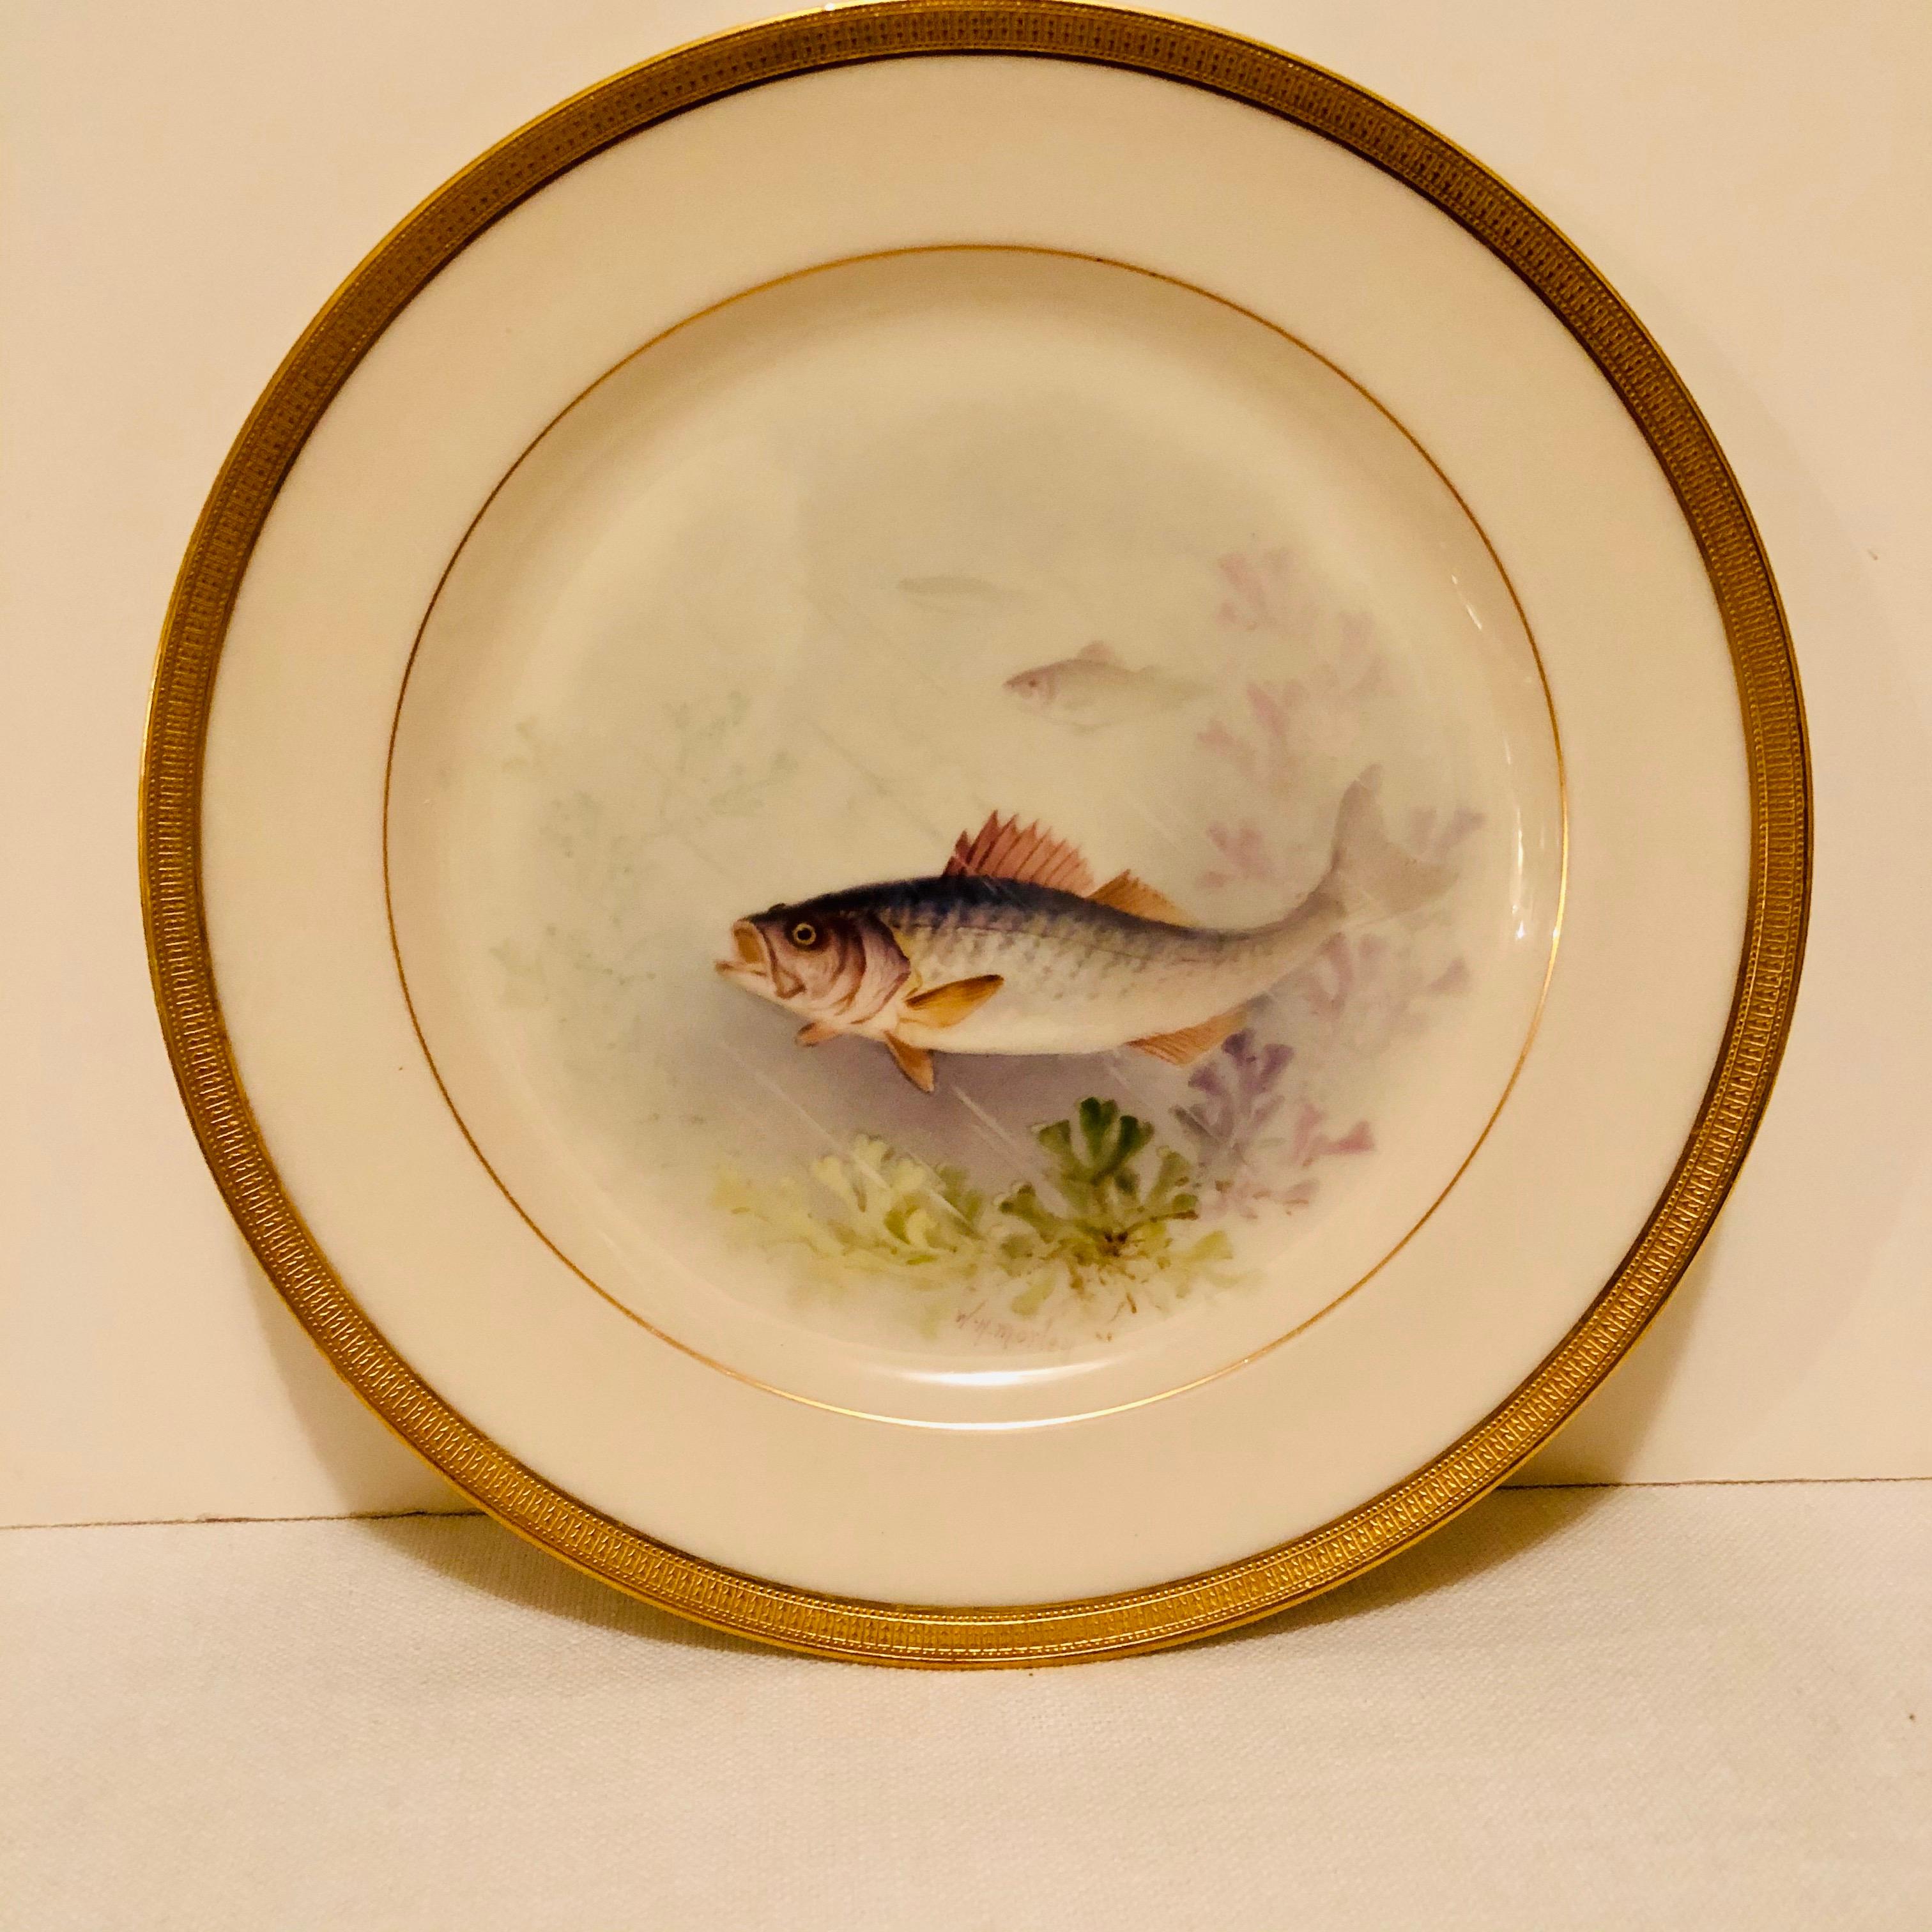 Set of Lenox Fish Plates Each Painted with Different Fish Artist Signed Morley 3